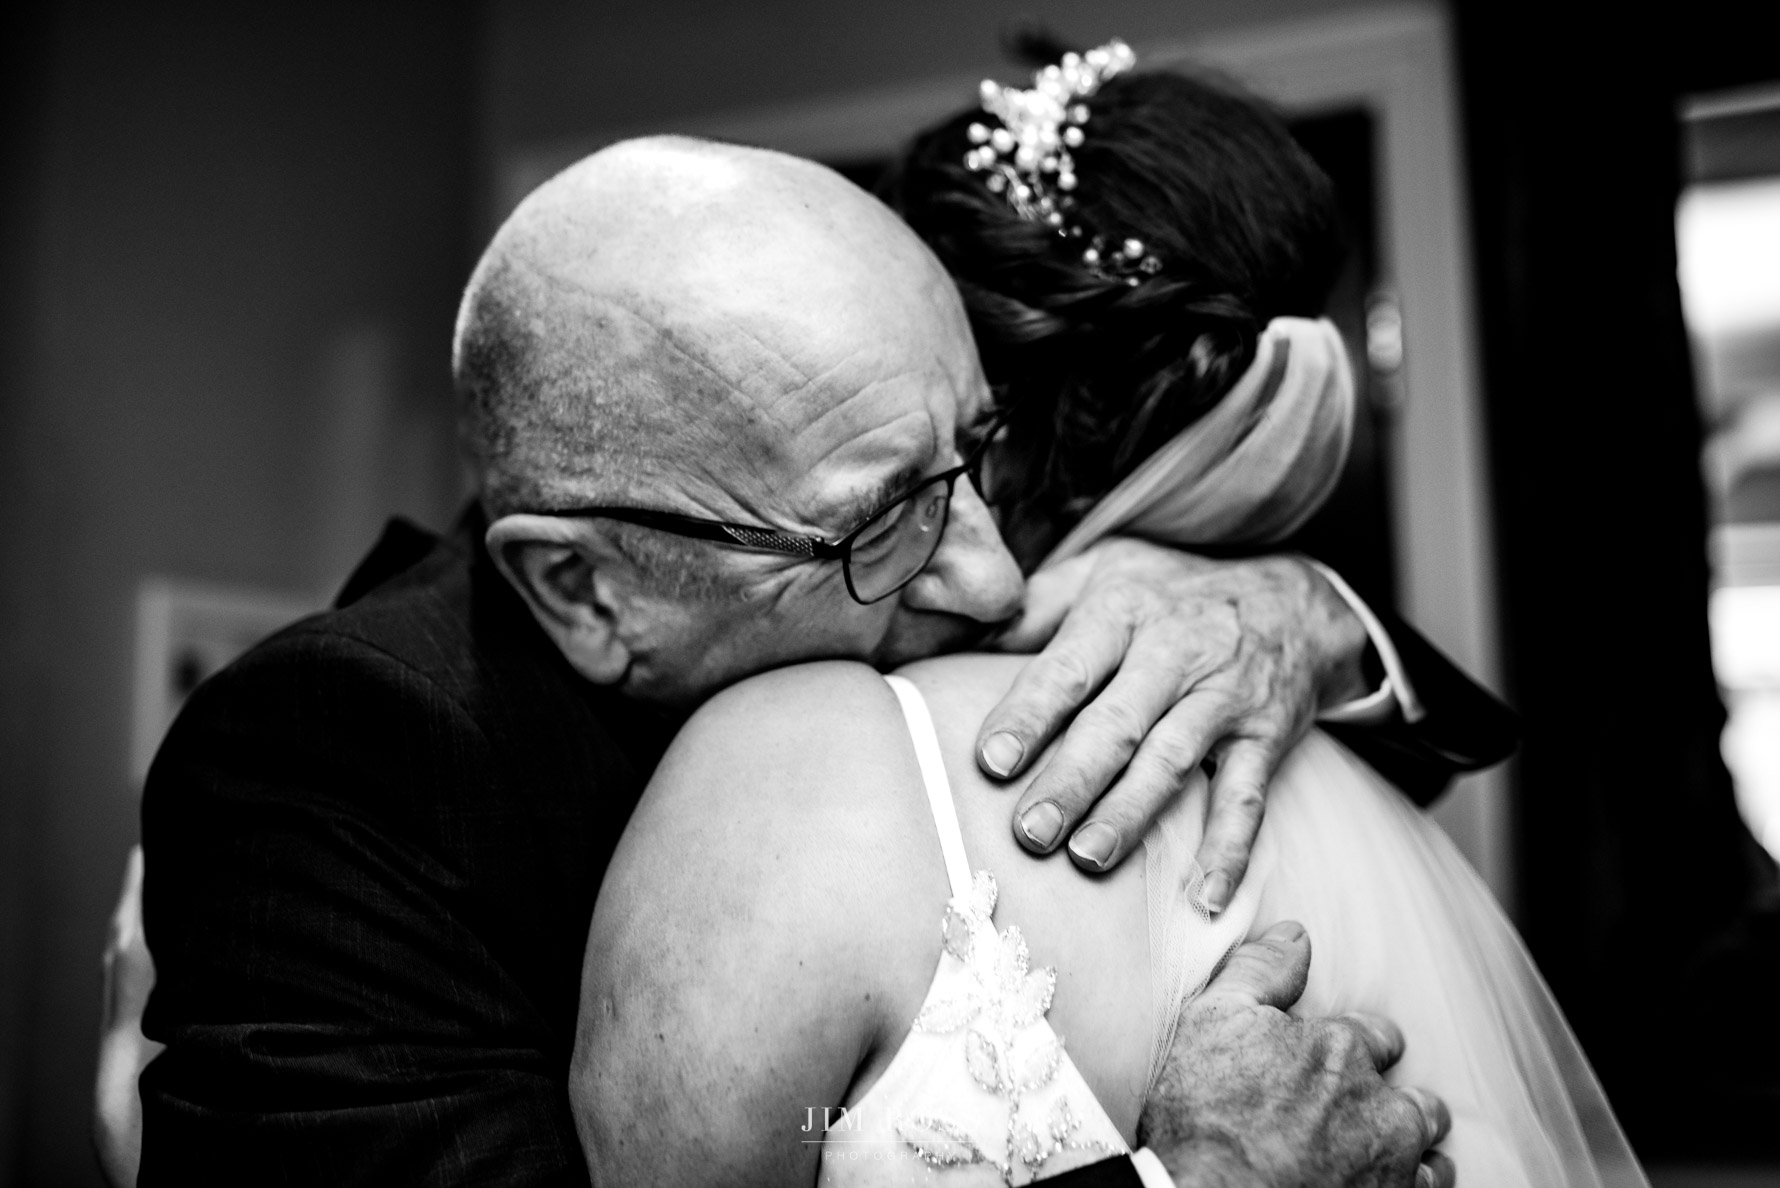 tight squeeze from Dad as he seems bride for first time